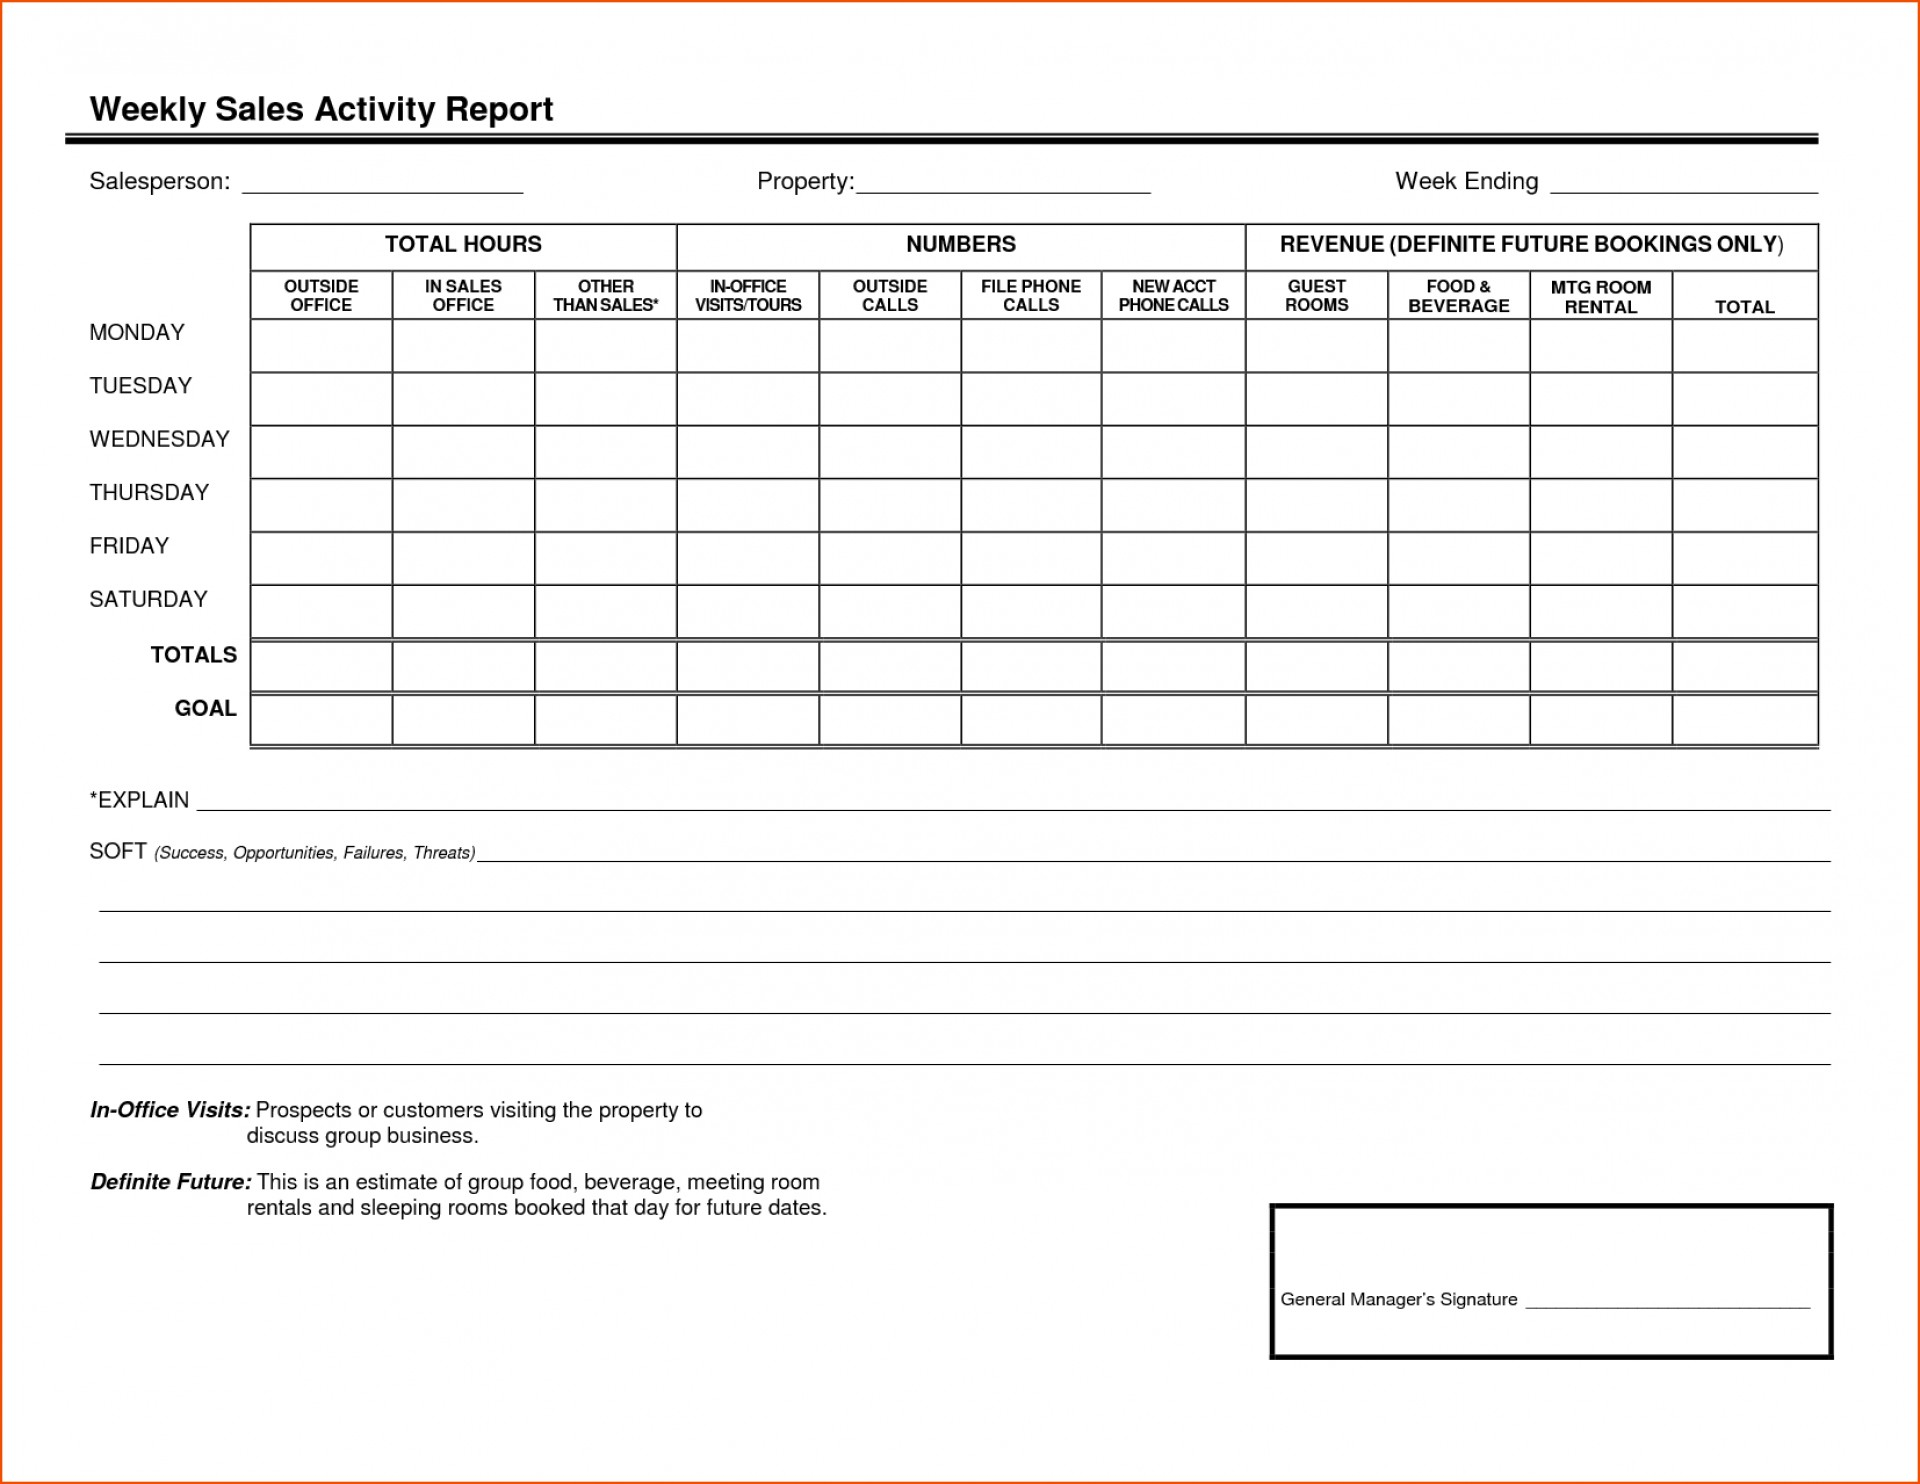 001 Sales Calls Report Template Call Awesome Ideas Daily In For Sales Rep Visit Report Template